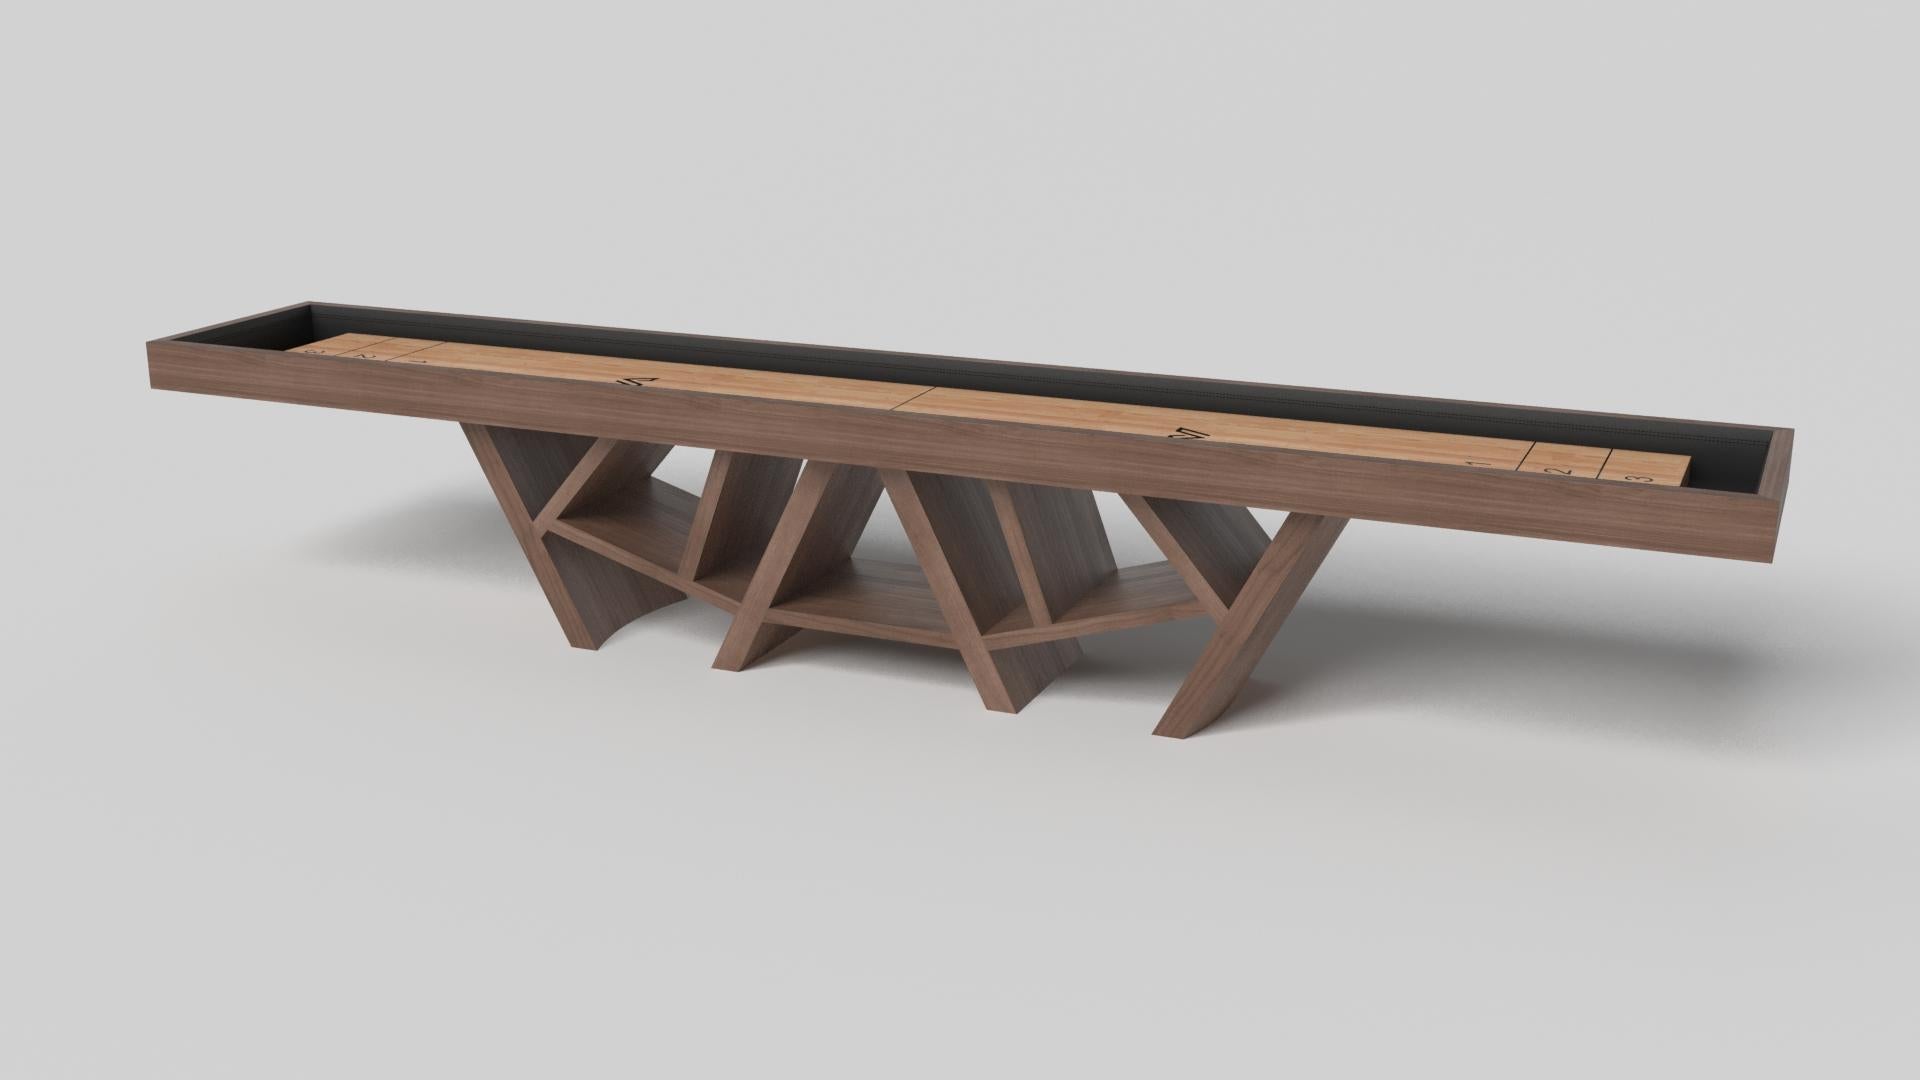 With a combination of acute angles, smooth lines, and geometric configurations, the Maze shuffleboard table in walnut is characterized by a labyrinth-inspired base with a mystifying motif. Beautifully detailed with a smooth black top for game play,